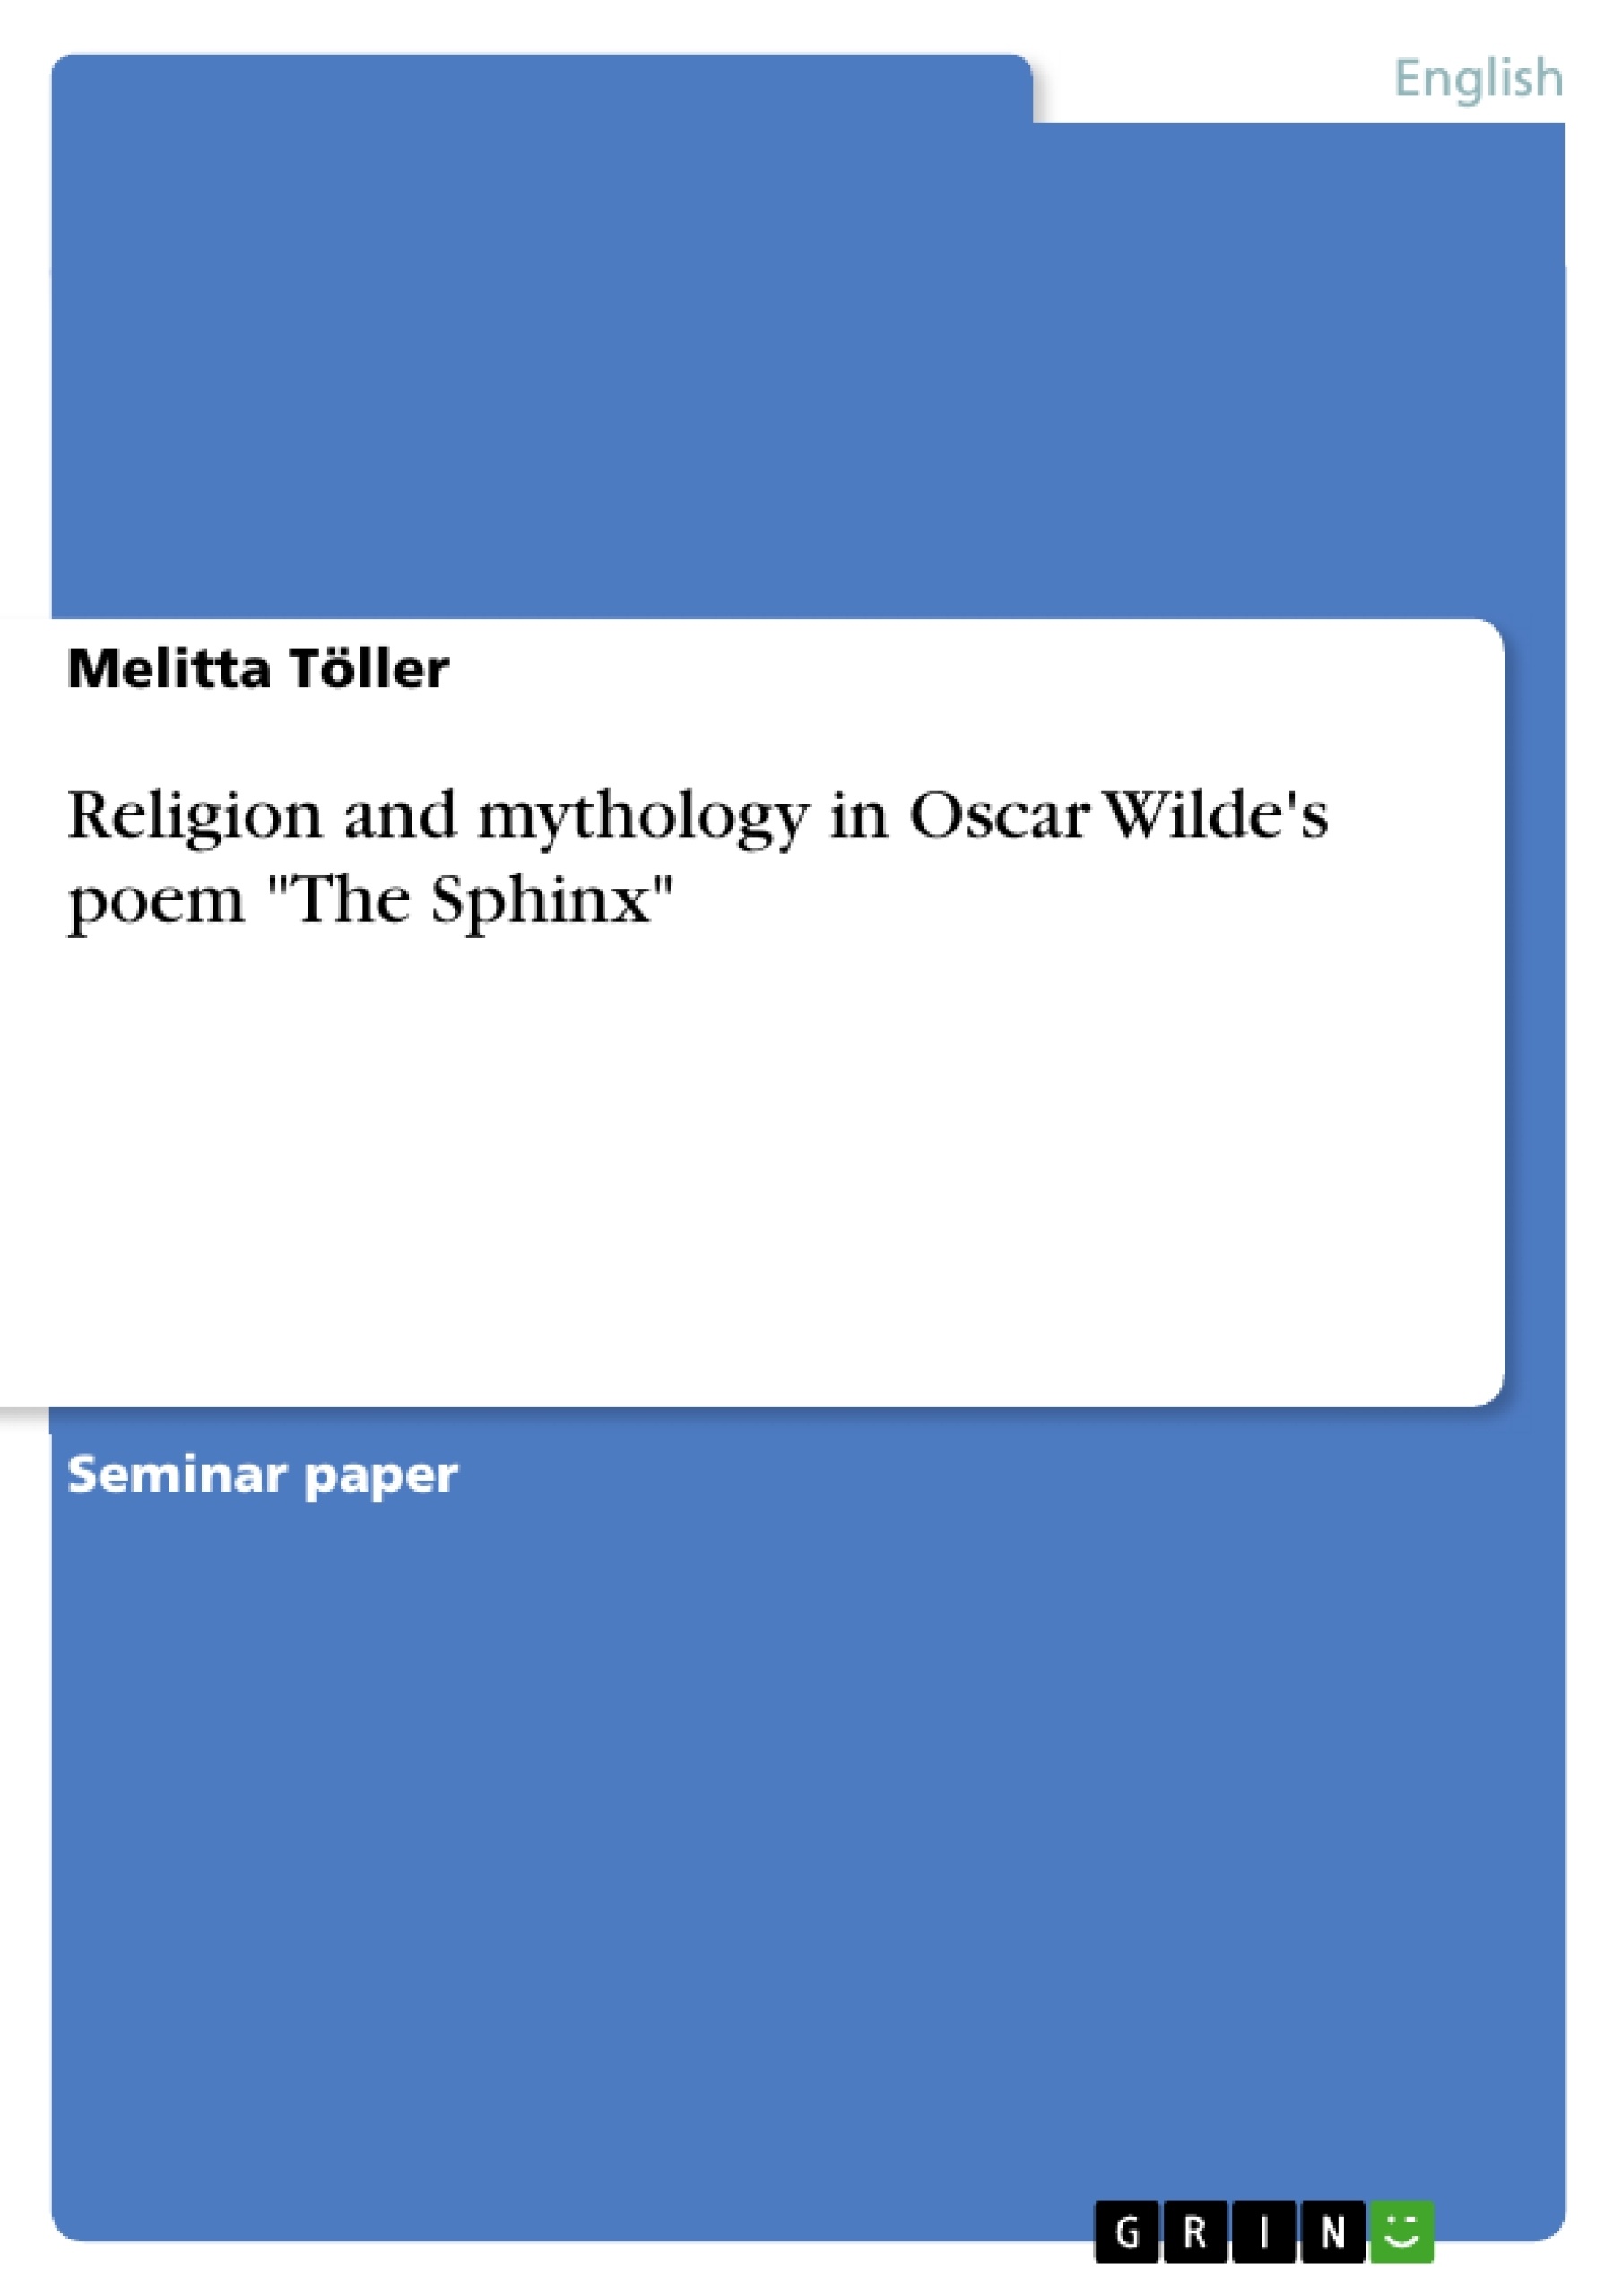 Title: Religion and mythology in Oscar Wilde's poem "The Sphinx"